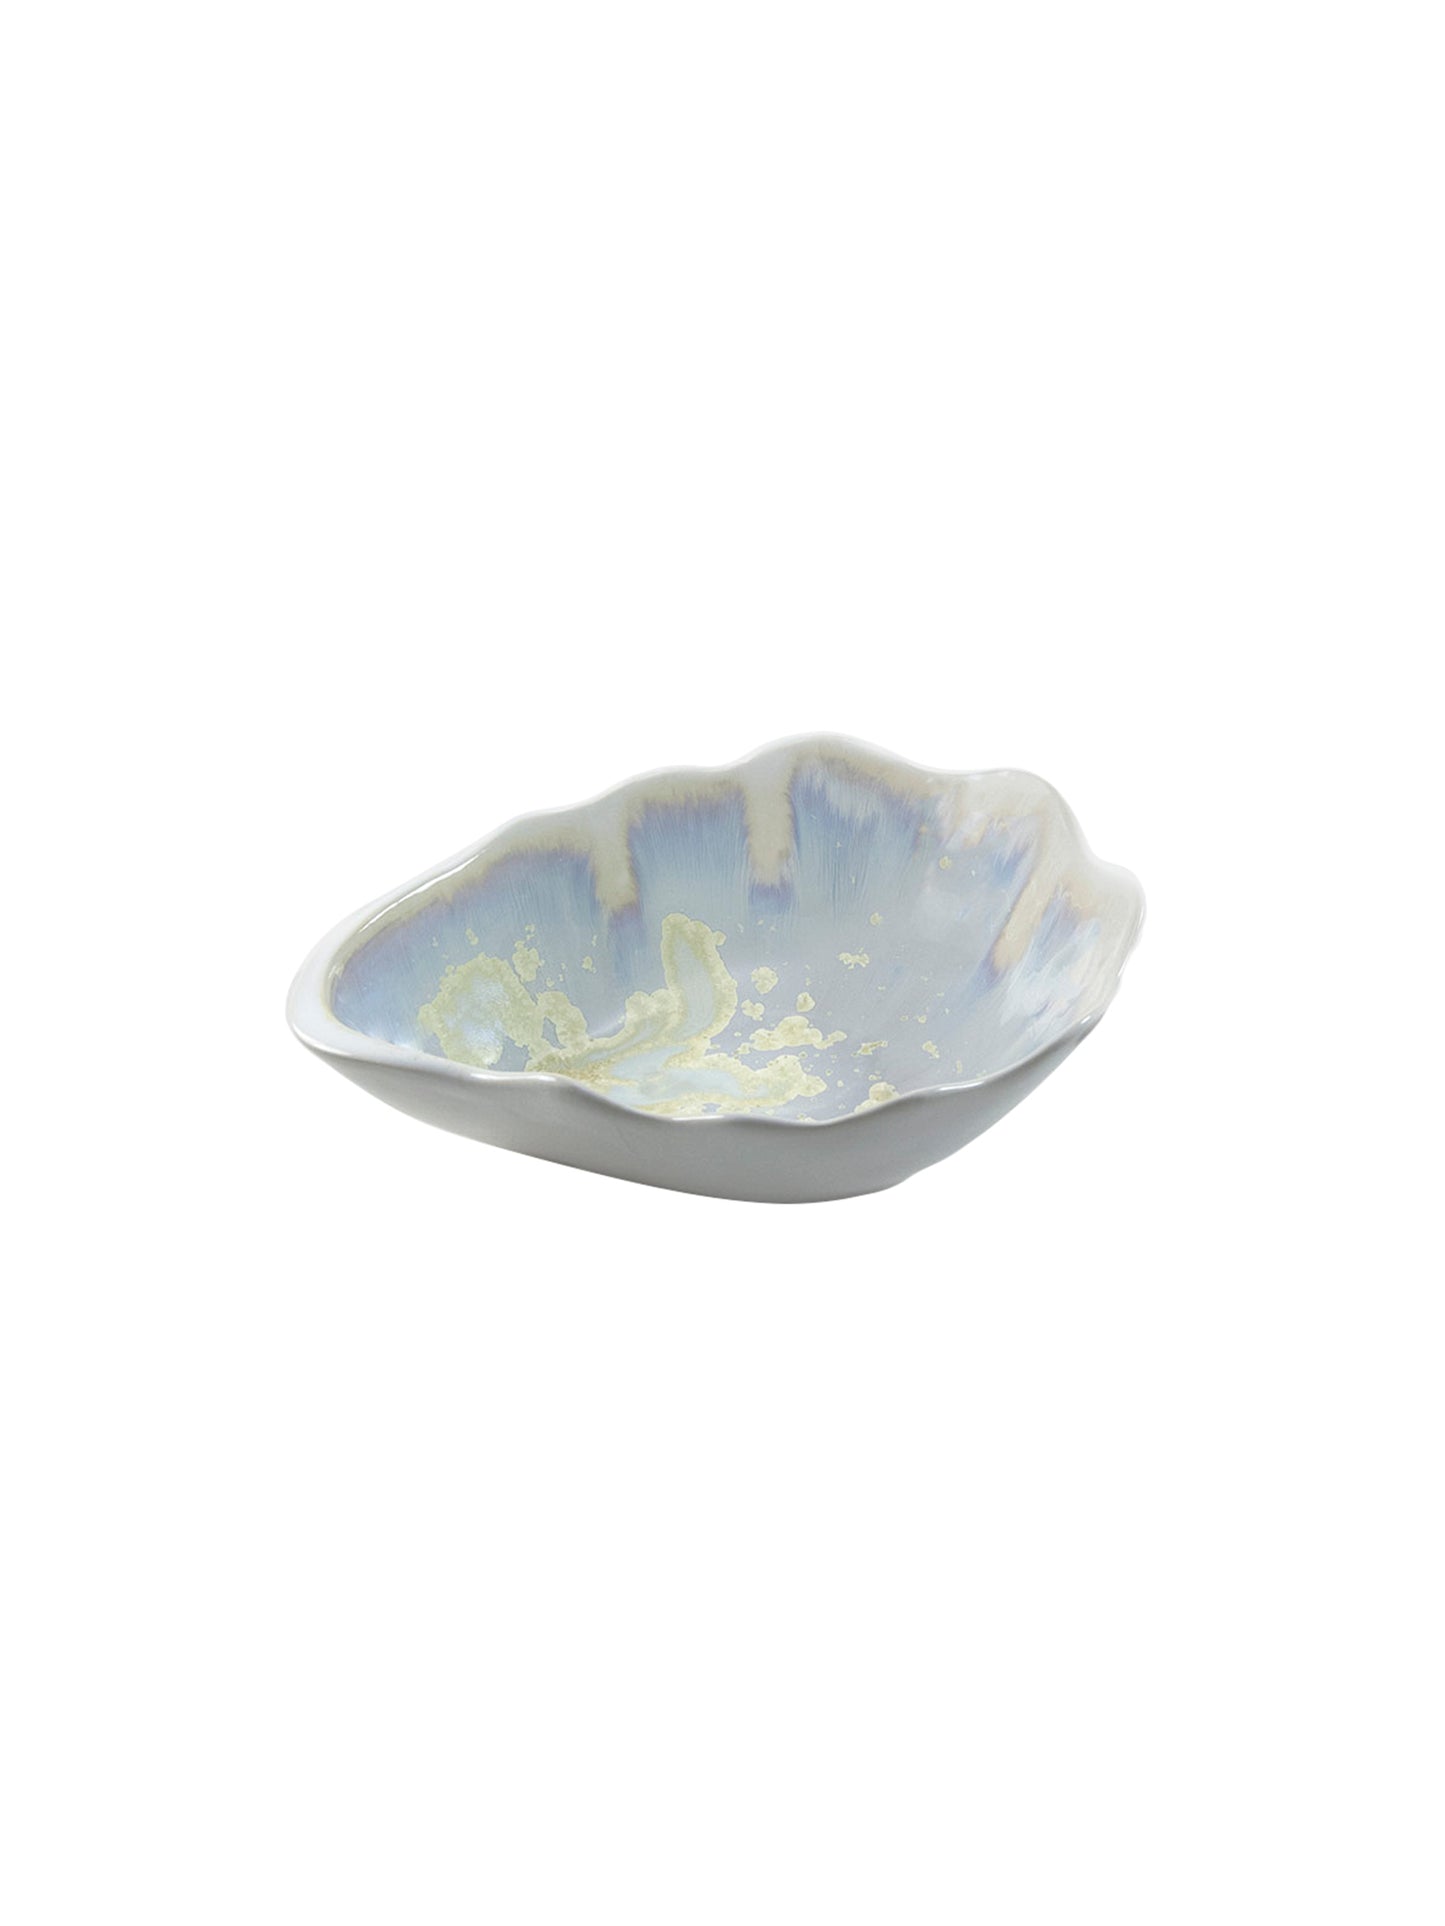 Alison Evans Oyster Series Nesting Bowl Pearl Weston Table